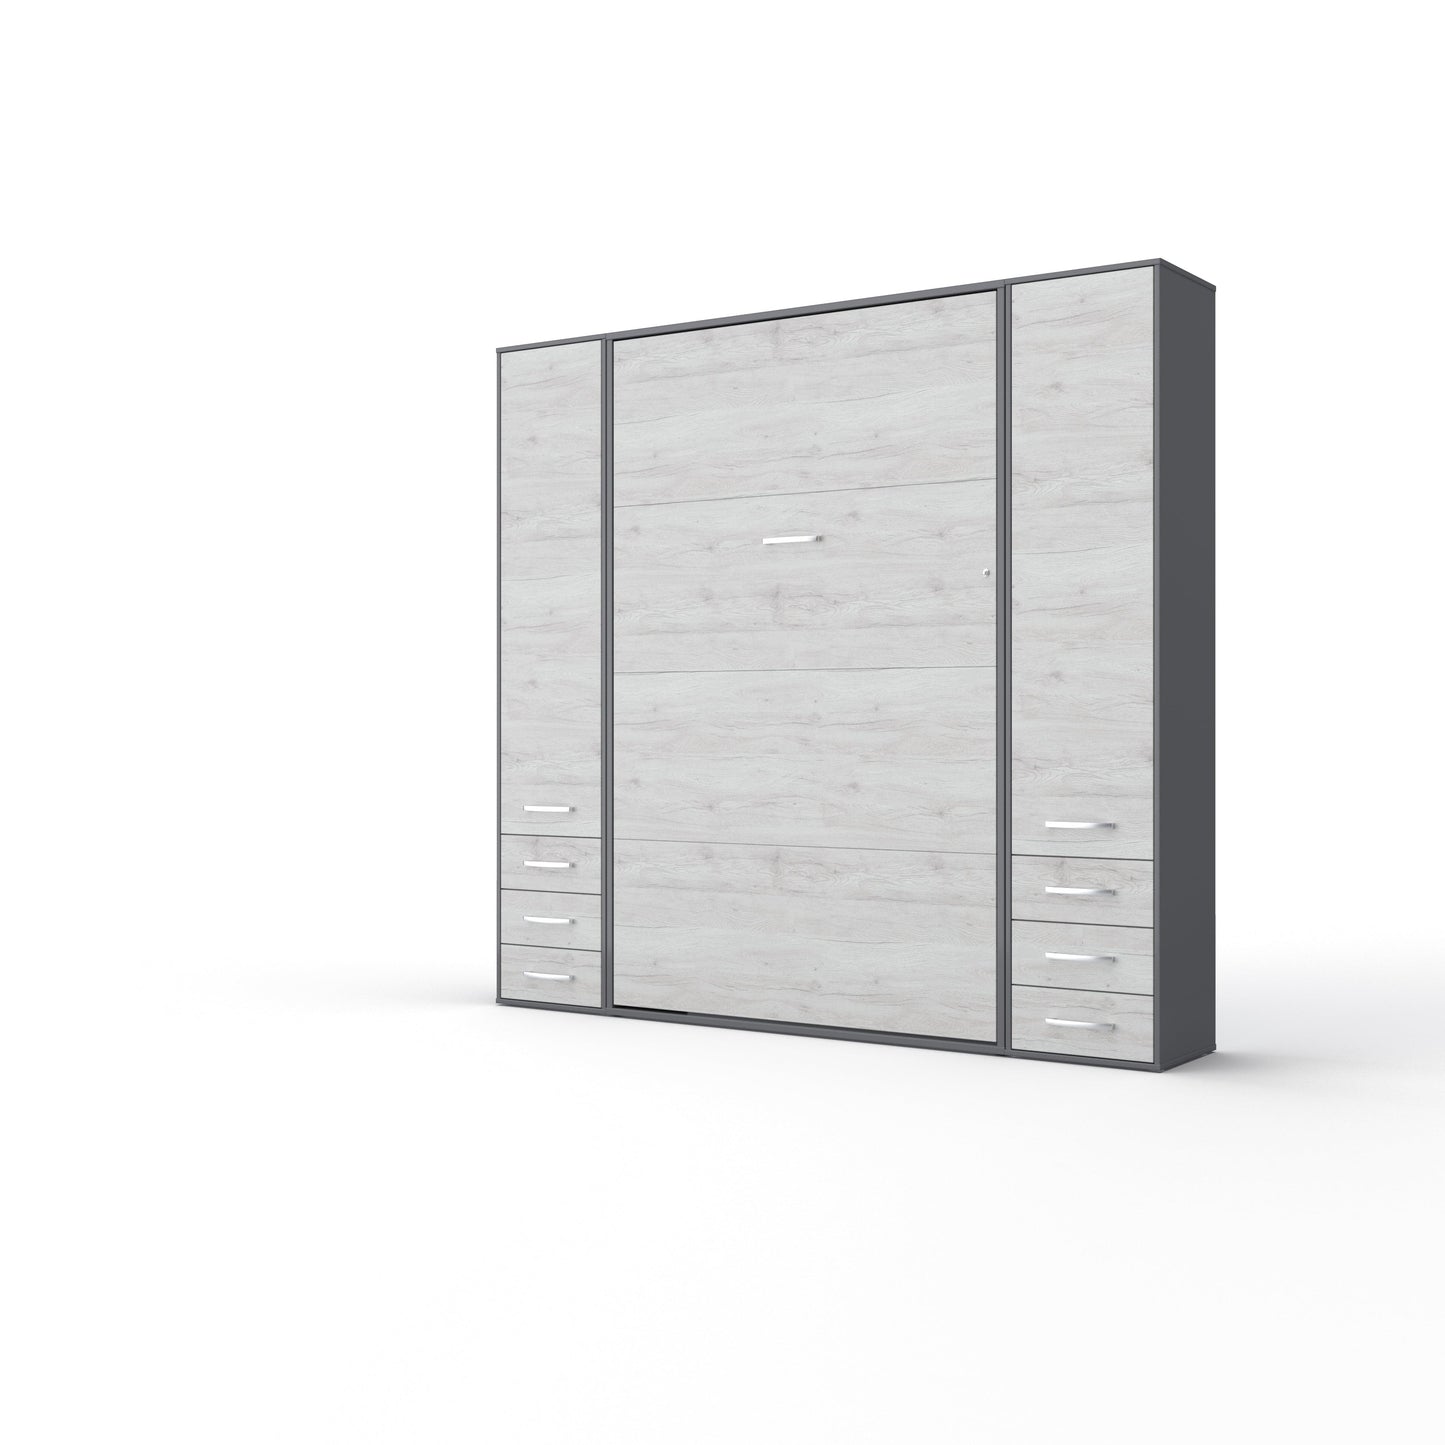 Maxima House Invento Vertical Wall Bed, European Full XL Size with 2 cabinets Grey/White Monaco IN140V-07GW